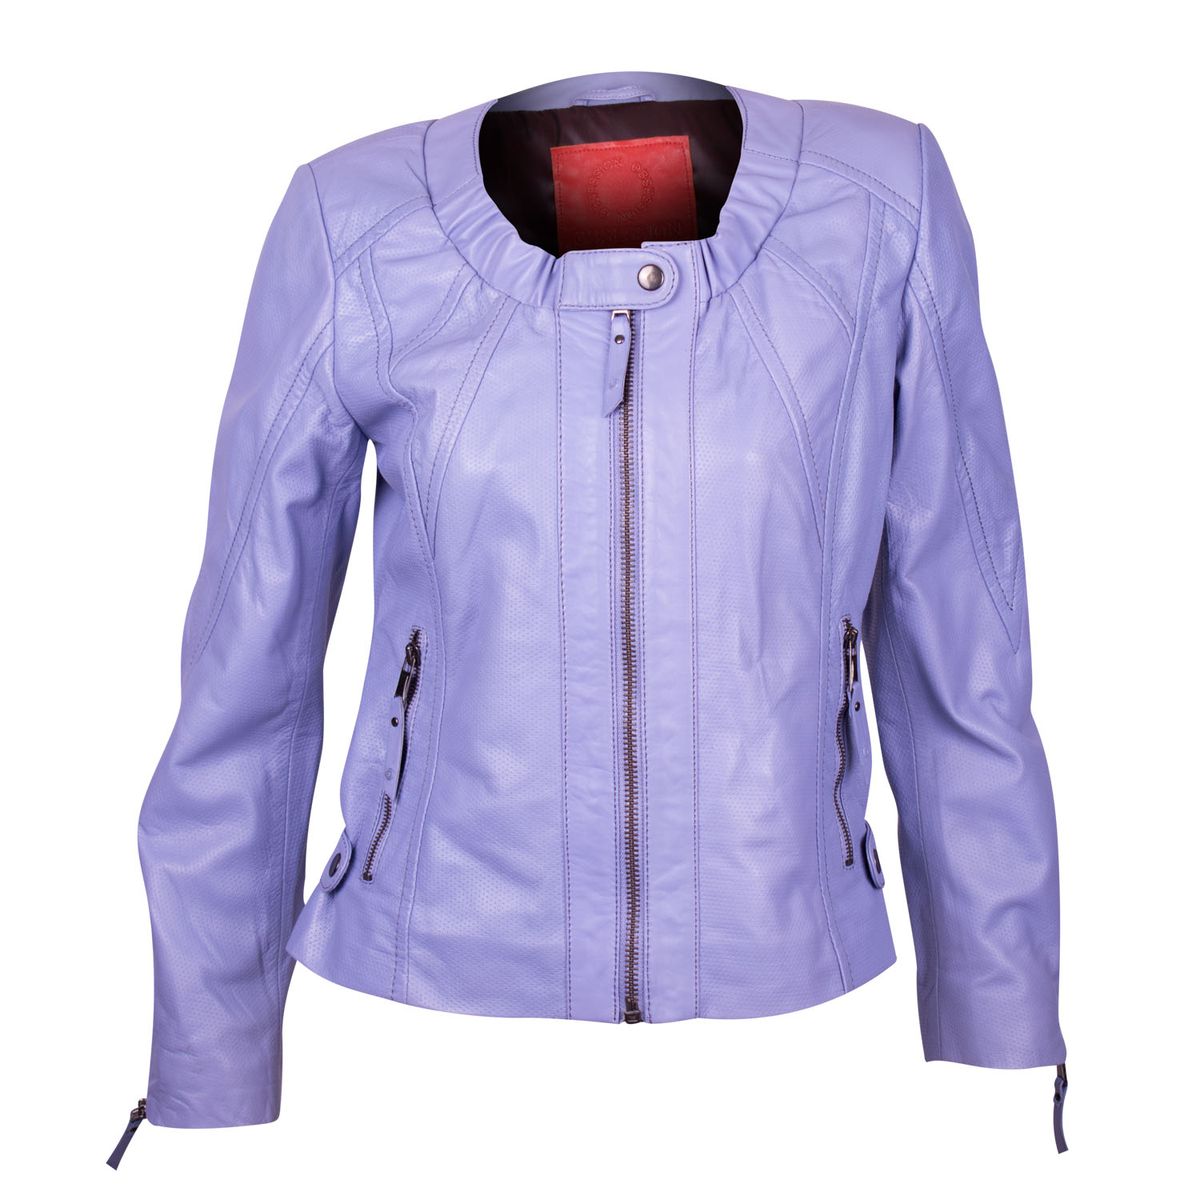 Mia Collar 100% Lamb Leather Jacket | Buy Online in South Africa ...